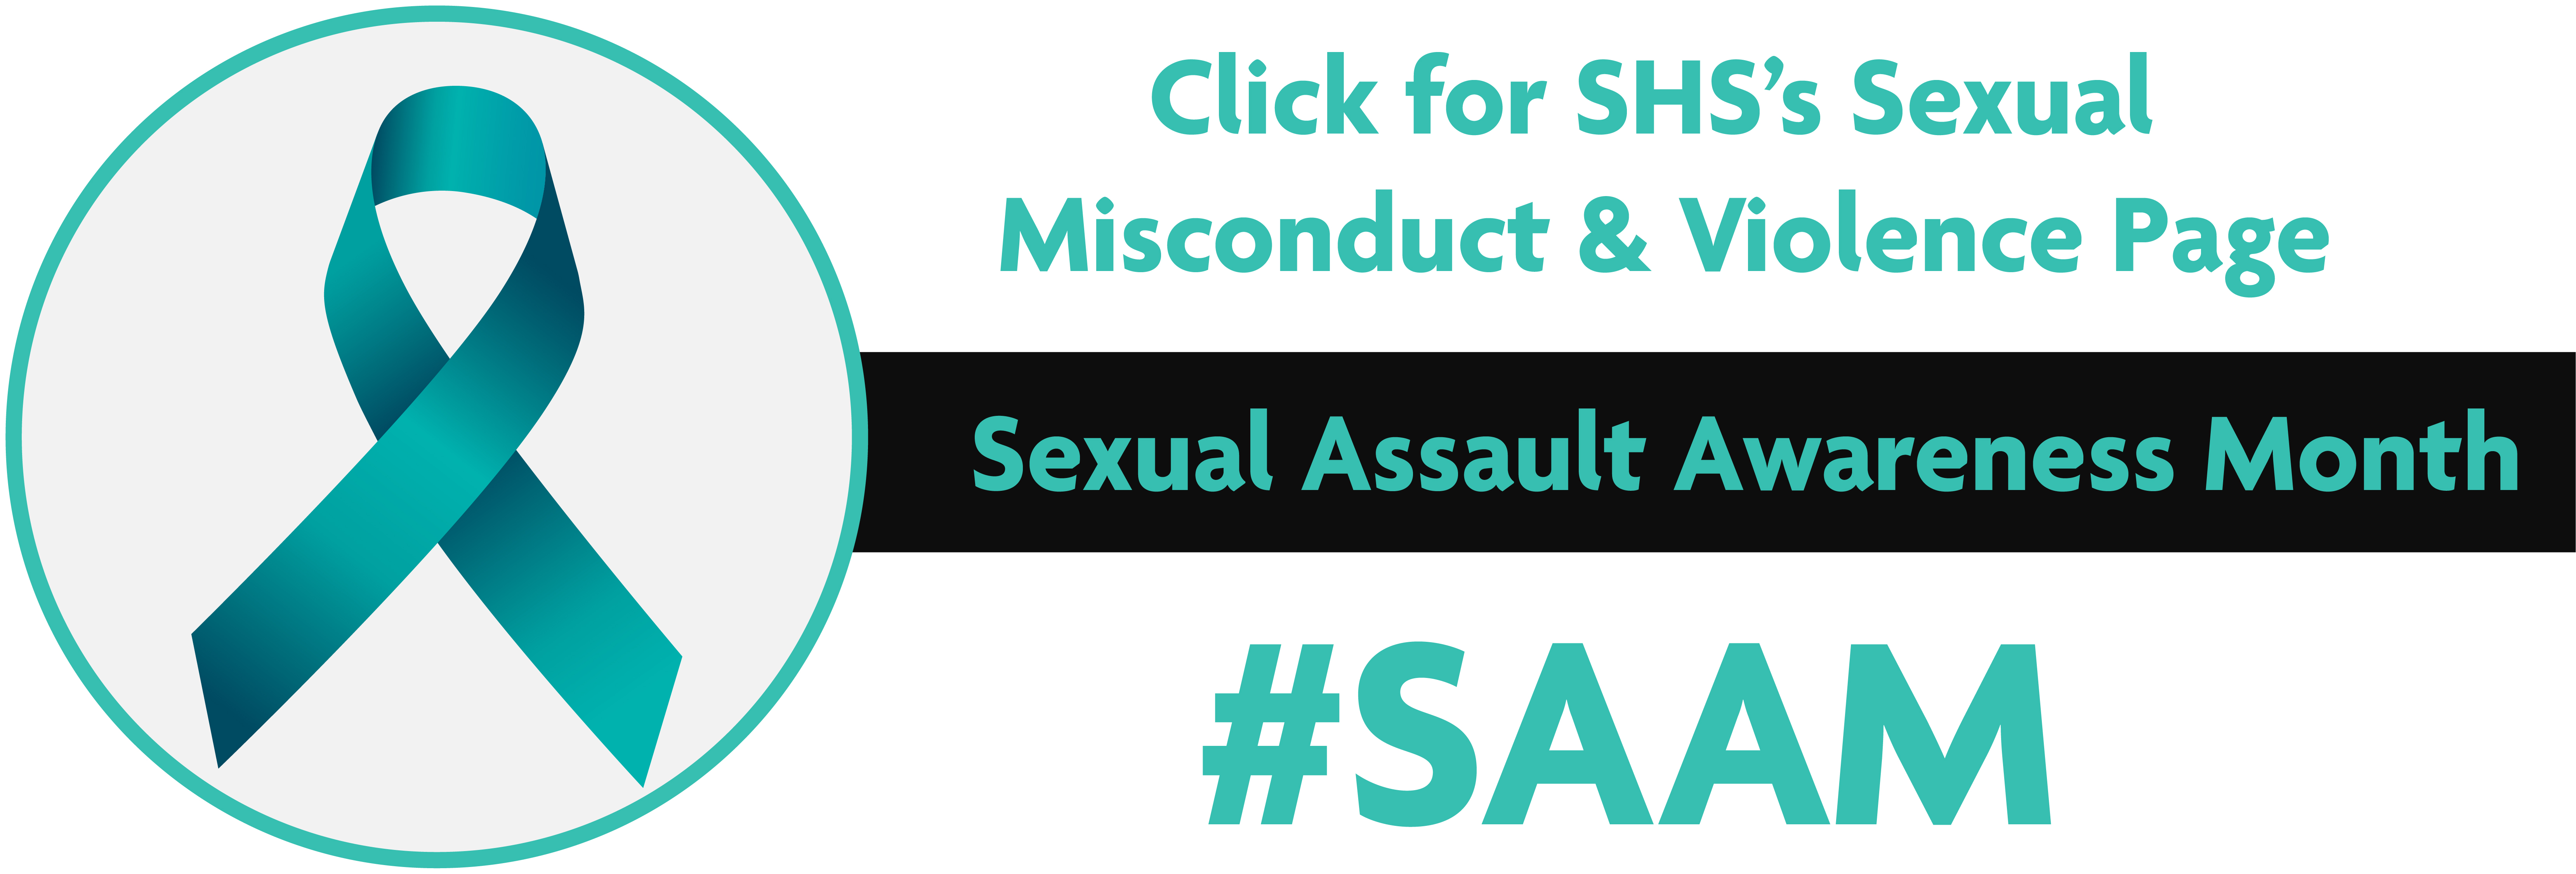 Sexual Misconduct & Violence